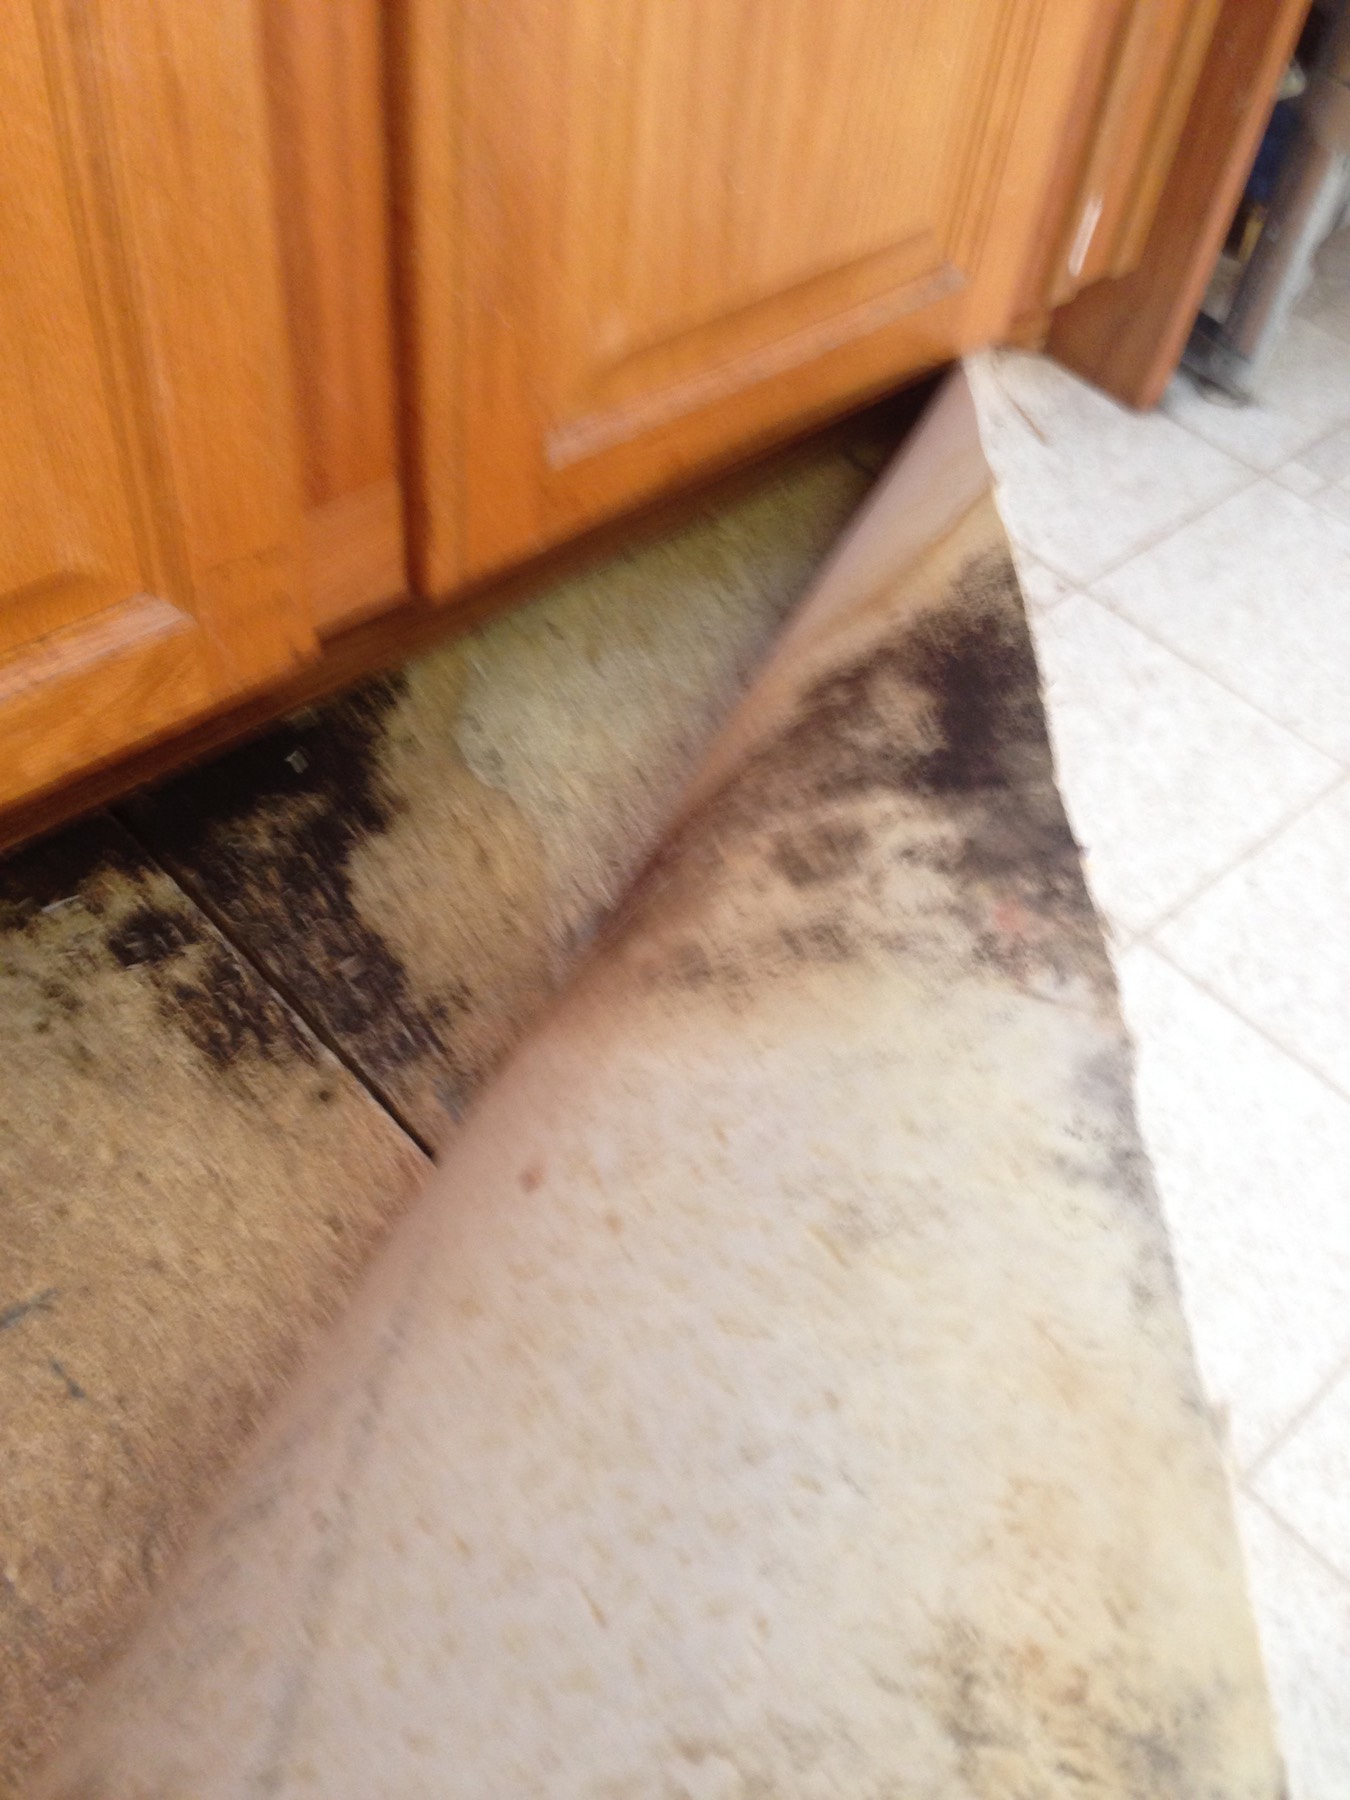 Causes of Water Damage in Kitchen